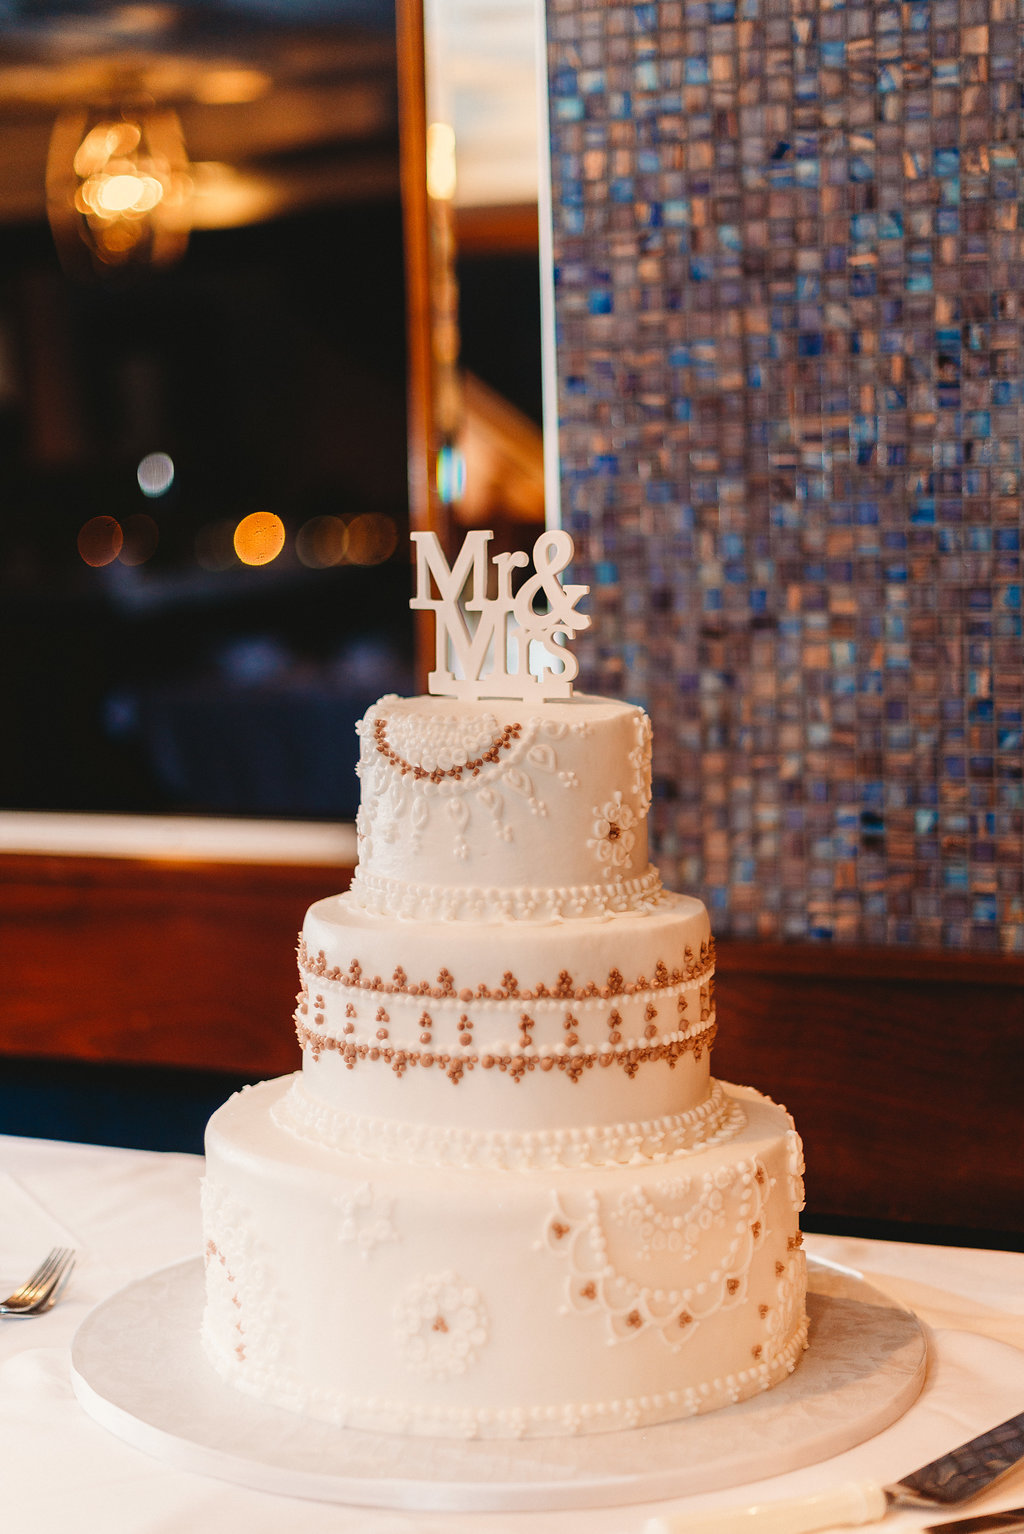 Three Tier White Cake with Floral and Whimsical Patterns and Mauve, Brown Accents with Mr and Mrs Cake Topper | Tampa Bay Wedding Cake Baker Alessi Bakeries